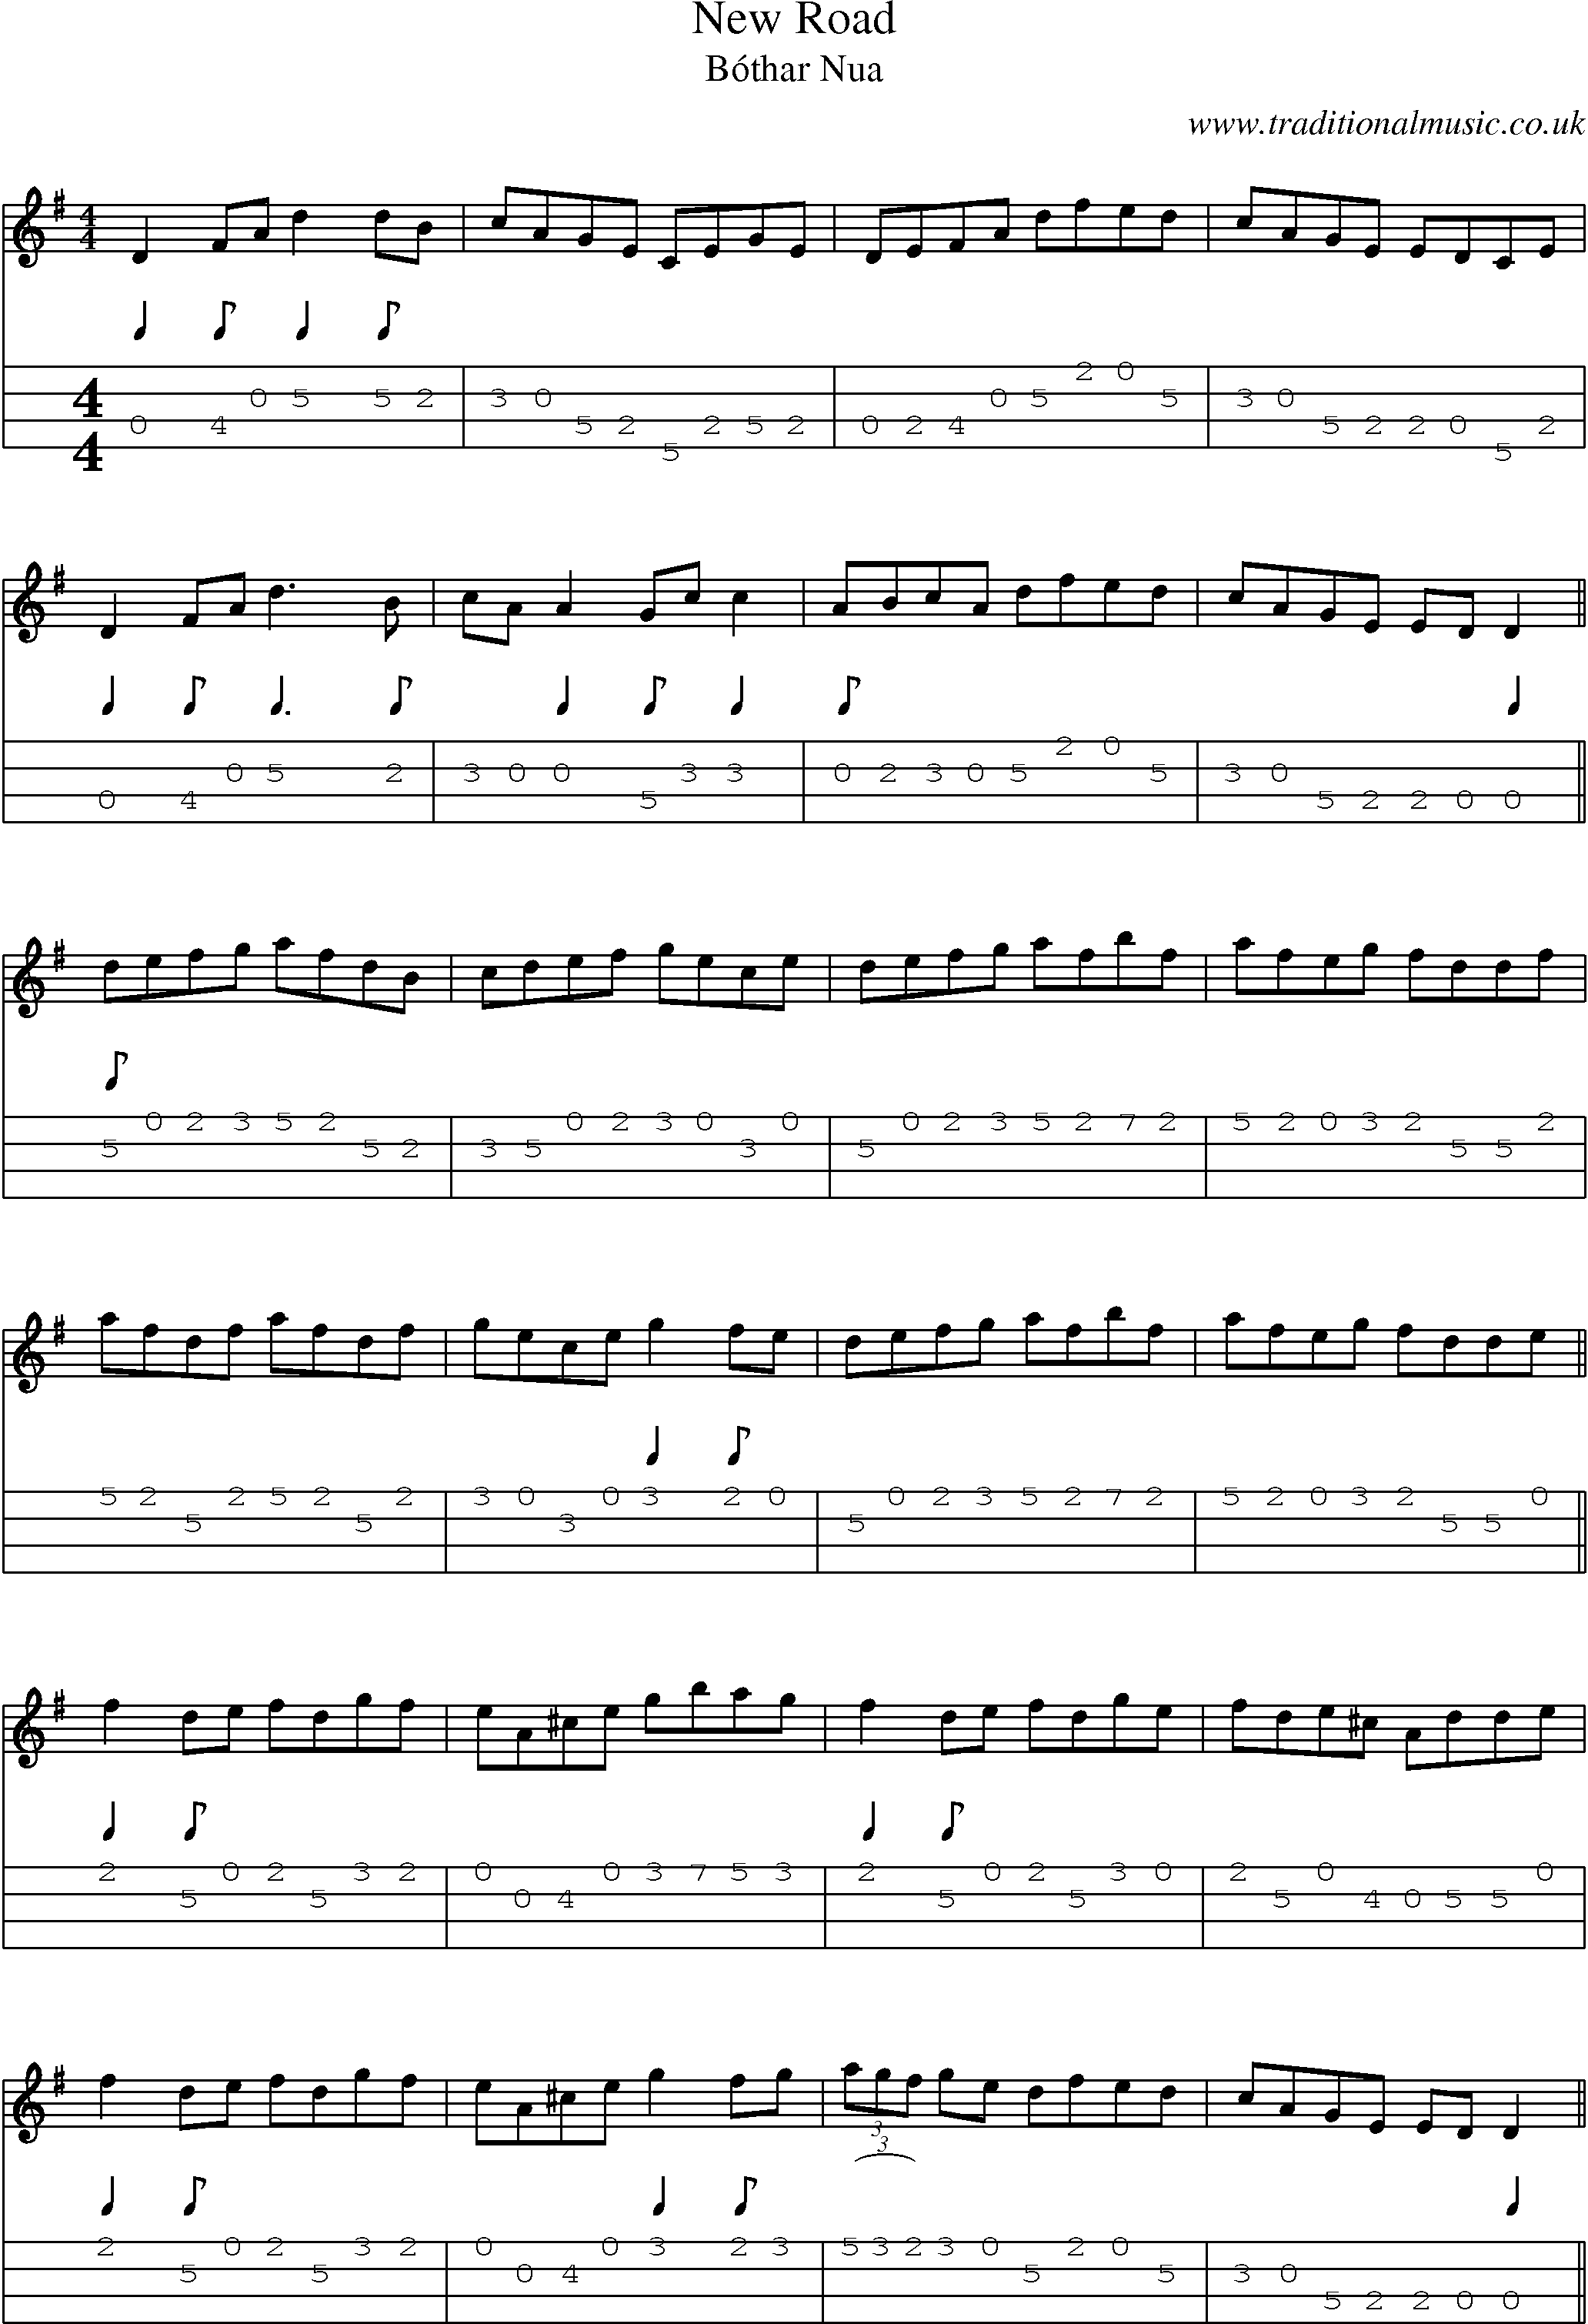 Music Score and Mandolin Tabs for New Road